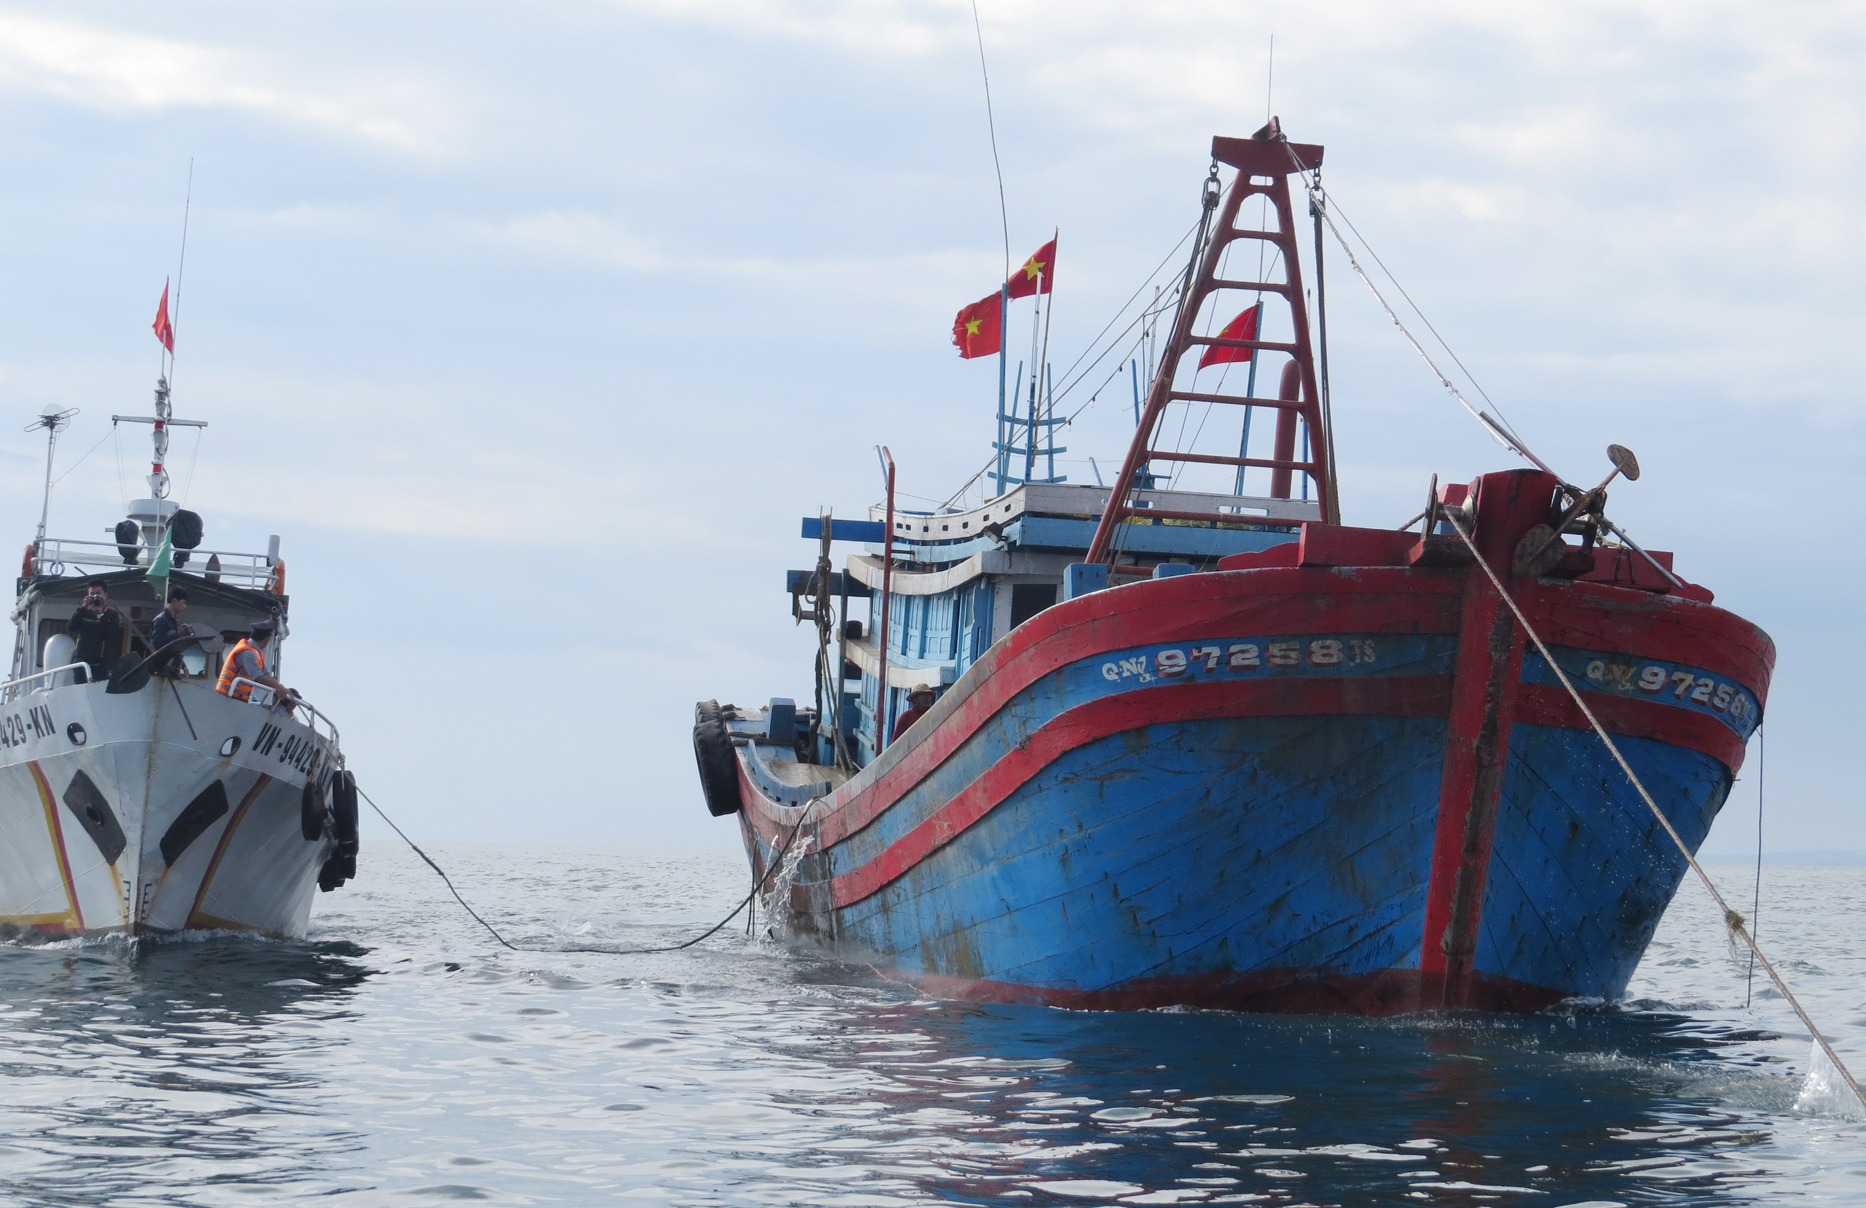 The ship VN-94429-KN is next to the offending fishing vessel in the waters of Quang Binh. Photo: T. Phung.